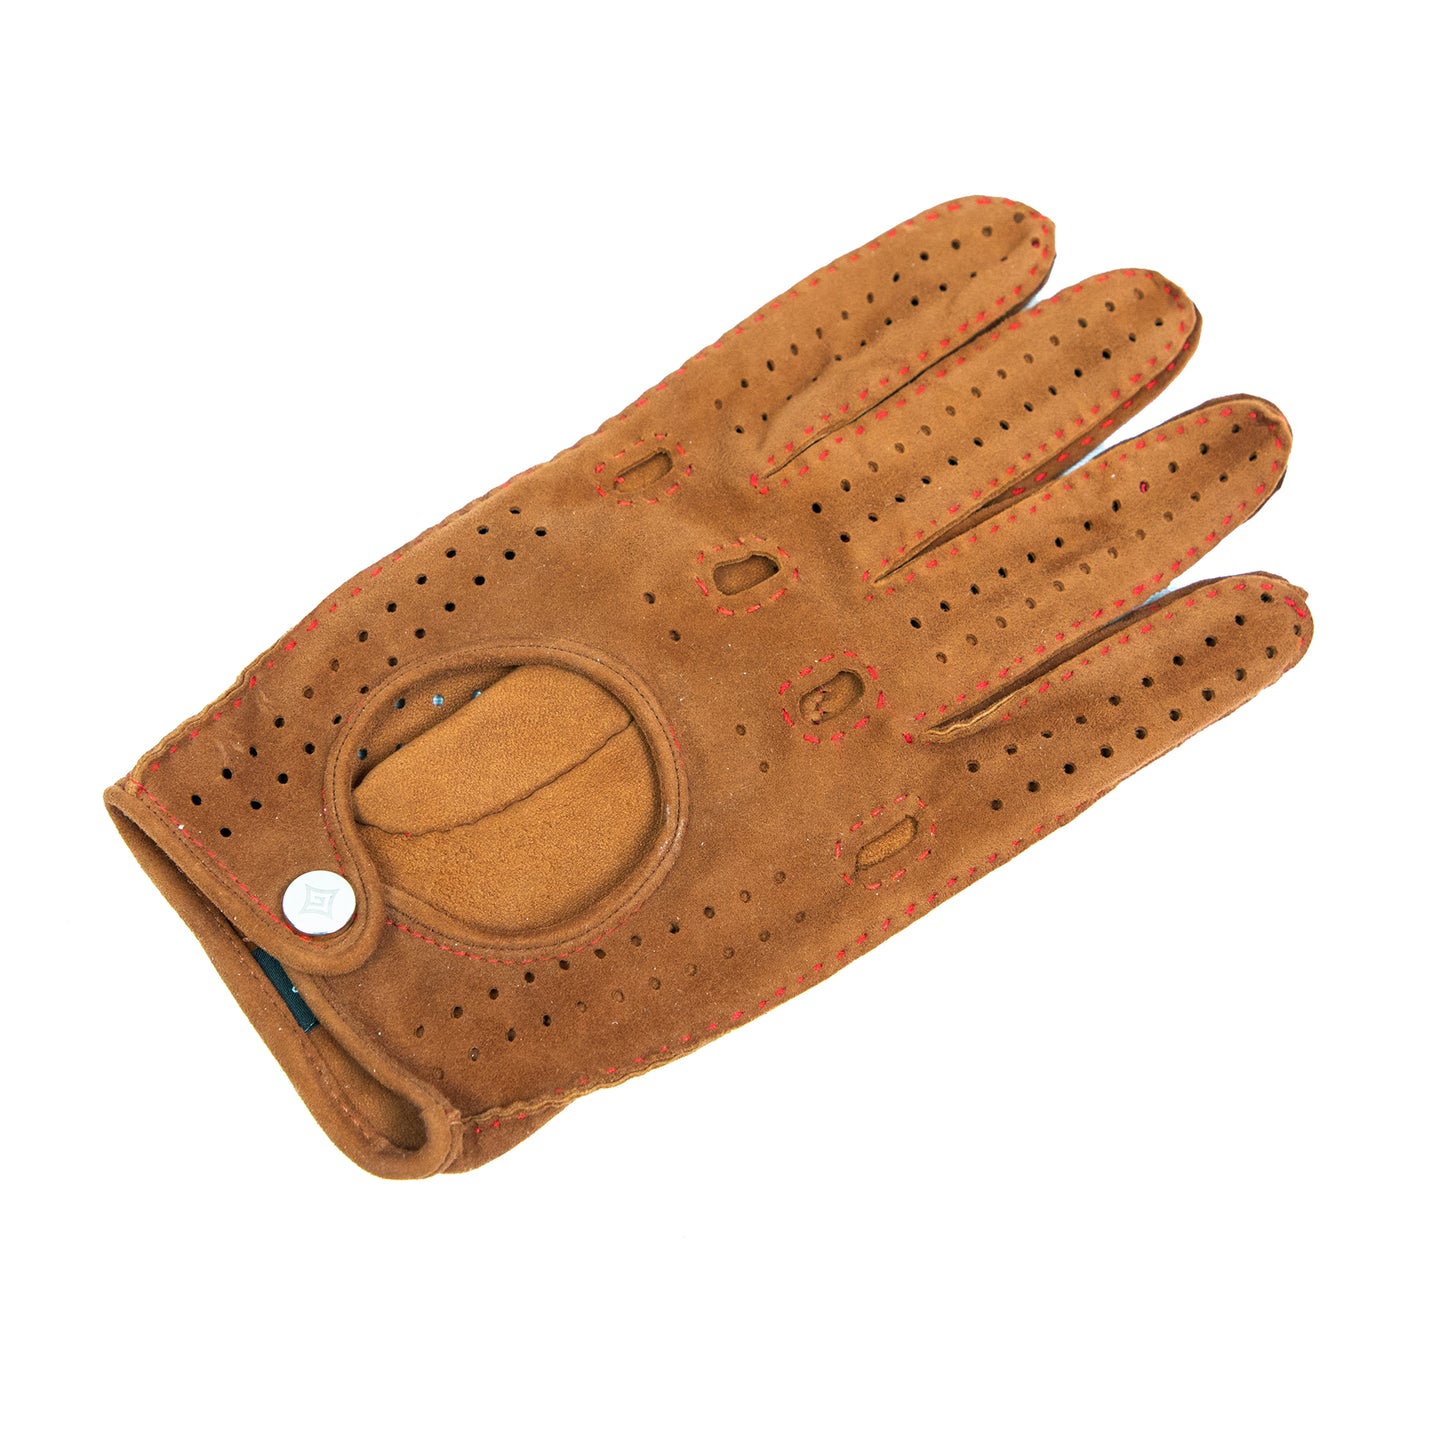 Men's unlined hand-stitched suede driving gloves in tobacco color with button closure